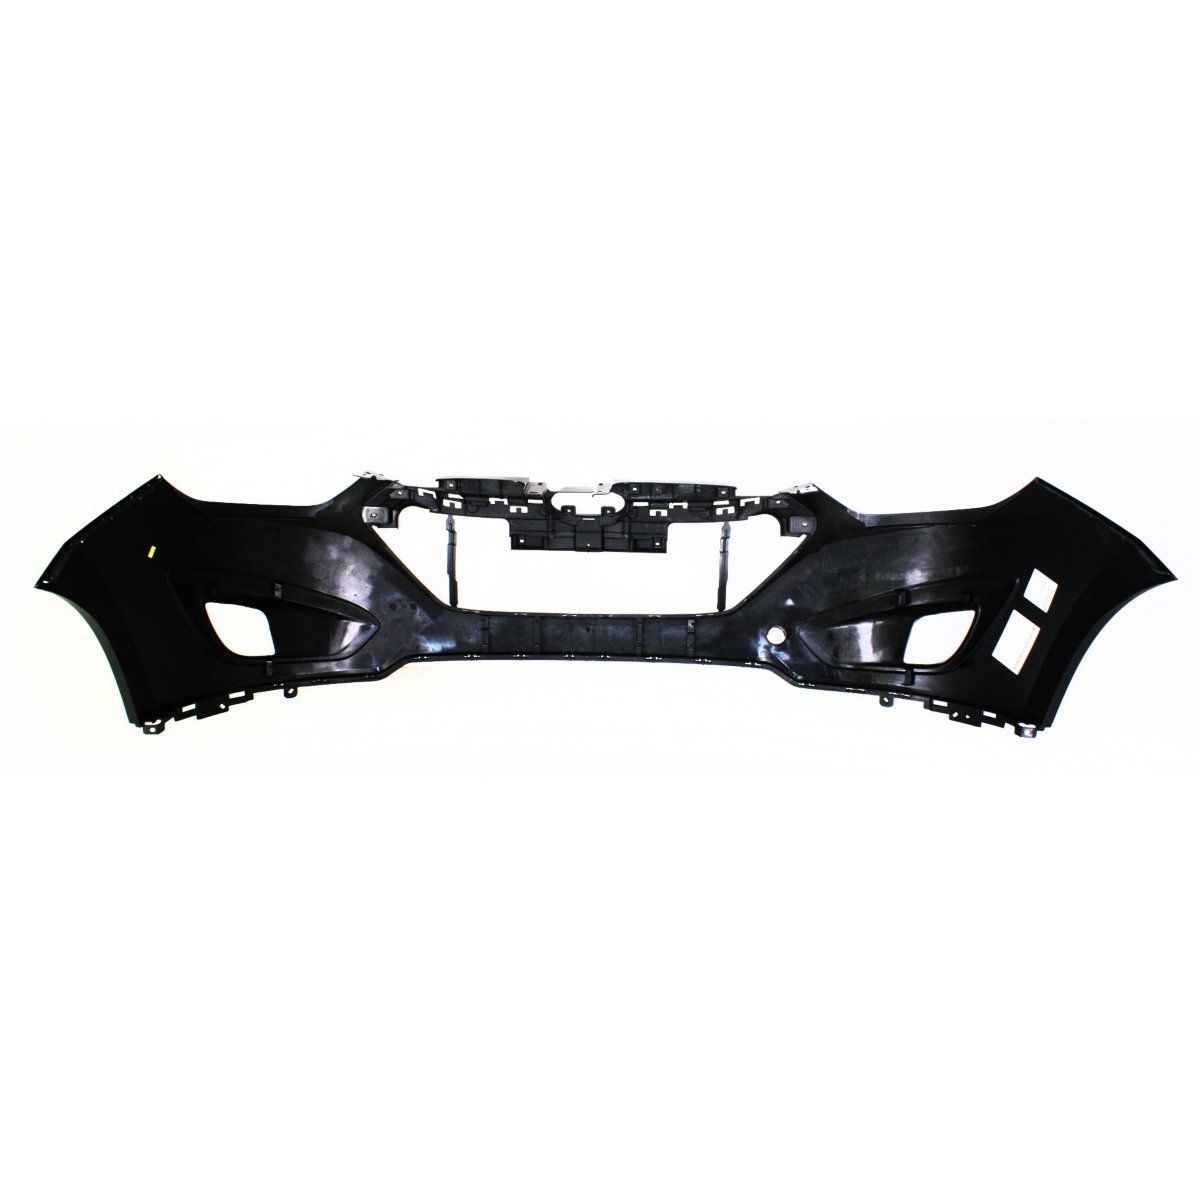 2010-2015 HYUNDAI TUCSON Front Bumper Cover Painted to Match